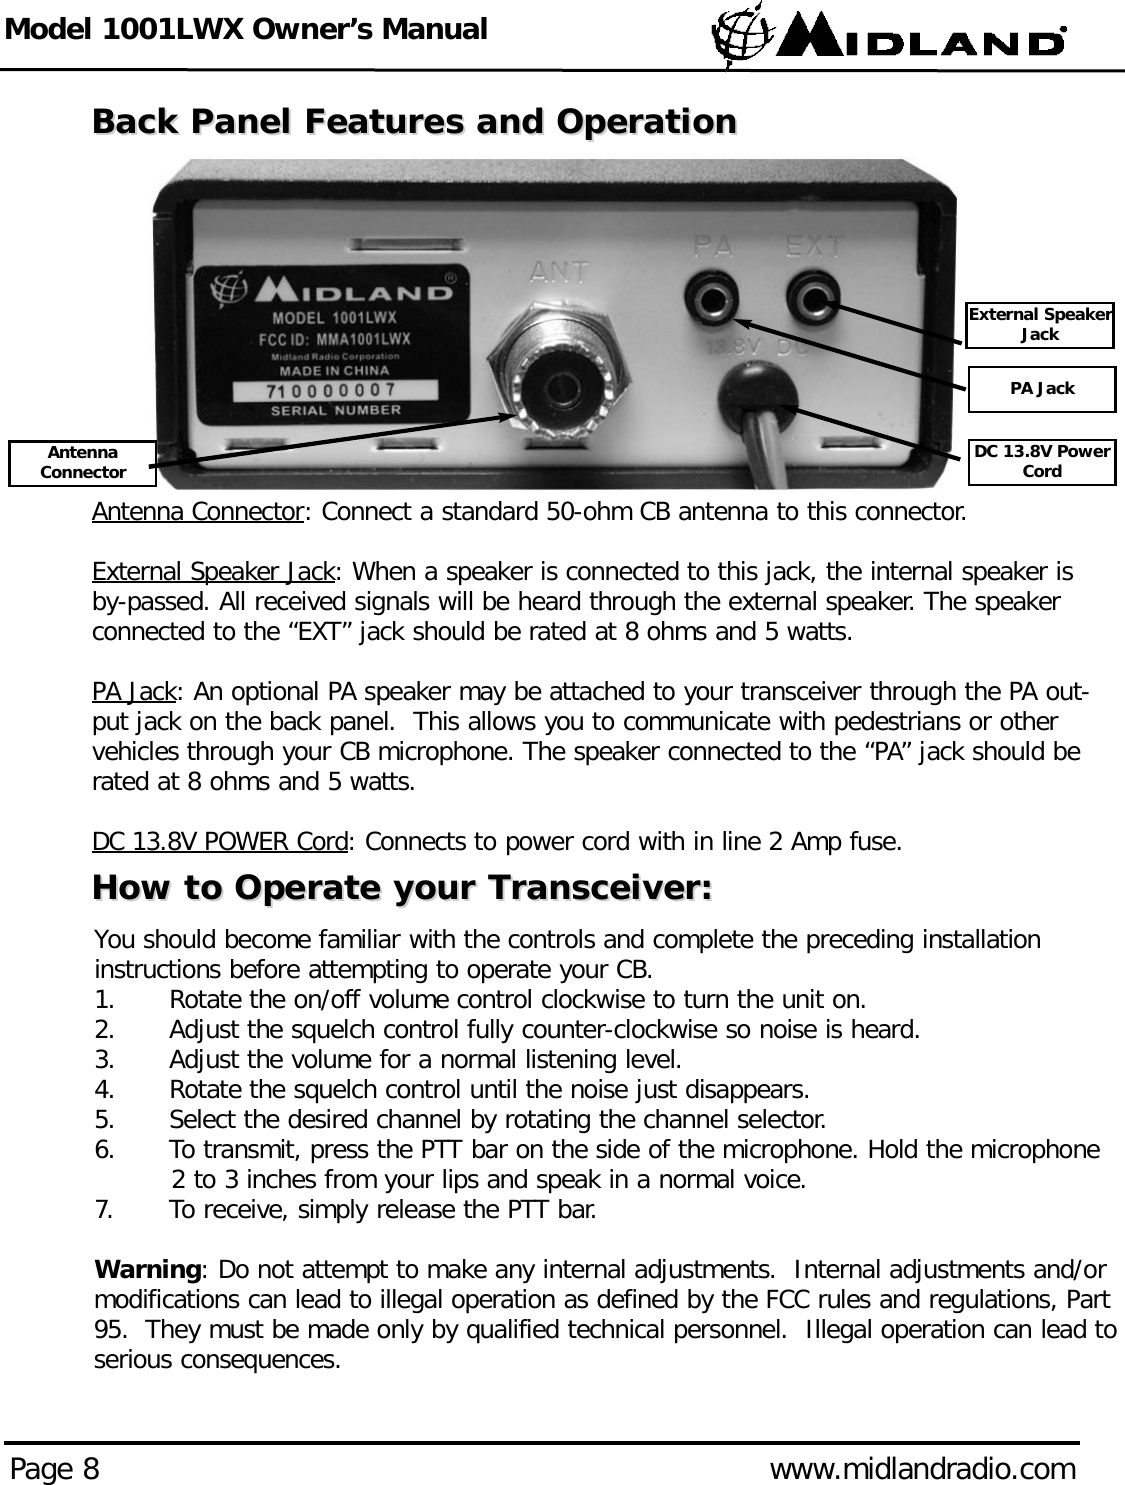 Model 1001LWX Owner’s ManualPage 8 www.midlandradio.comBack Panel Features and OperationBack Panel Features and OperationAntenna Connector: Connect a standard 50-ohm CB antenna to this connector.External Speaker Jack: When a speaker is connected to this jack, the internal speaker isby-passed. All received signals will be heard through the external speaker. The speakerconnected to the “EXT” jack should be rated at 8 ohms and 5 watts.PA Jack: An optional PA speaker may be attached to your transceiver through the PA out-put jack on the back panel.  This allows you to communicate with pedestrians or othervehicles through your CB microphone. The speaker connected to the “PA” jack should berated at 8 ohms and 5 watts.DC 13.8V POWER Cord: Connects to power cord with in line 2 Amp fuse.How to Operate your Transceiver:How to Operate your Transceiver:You should become familiar with the controls and complete the preceding installationinstructions before attempting to operate your CB.1. Rotate the on/off volume control clockwise to turn the unit on.2. Adjust the squelch control fully counter-clockwise so noise is heard.3. Adjust the volume for a normal listening level.4. Rotate the squelch control until the noise just disappears.  5. Select the desired channel by rotating the channel selector. 6. To transmit, press the PTT bar on the side of the microphone. Hold the microphone 2 to 3 inches from your lips and speak in a normal voice.7. To receive, simply release the PTT bar.Warning: Do not attempt to make any internal adjustments.  Internal adjustments and/ormodifications can lead to illegal operation as defined by the FCC rules and regulations, Part95.  They must be made only by qualified technical personnel.  Illegal operation can lead toserious consequences.DC 13.8V PowerCordPA JackExternal SpeakerJackAntennaConnector